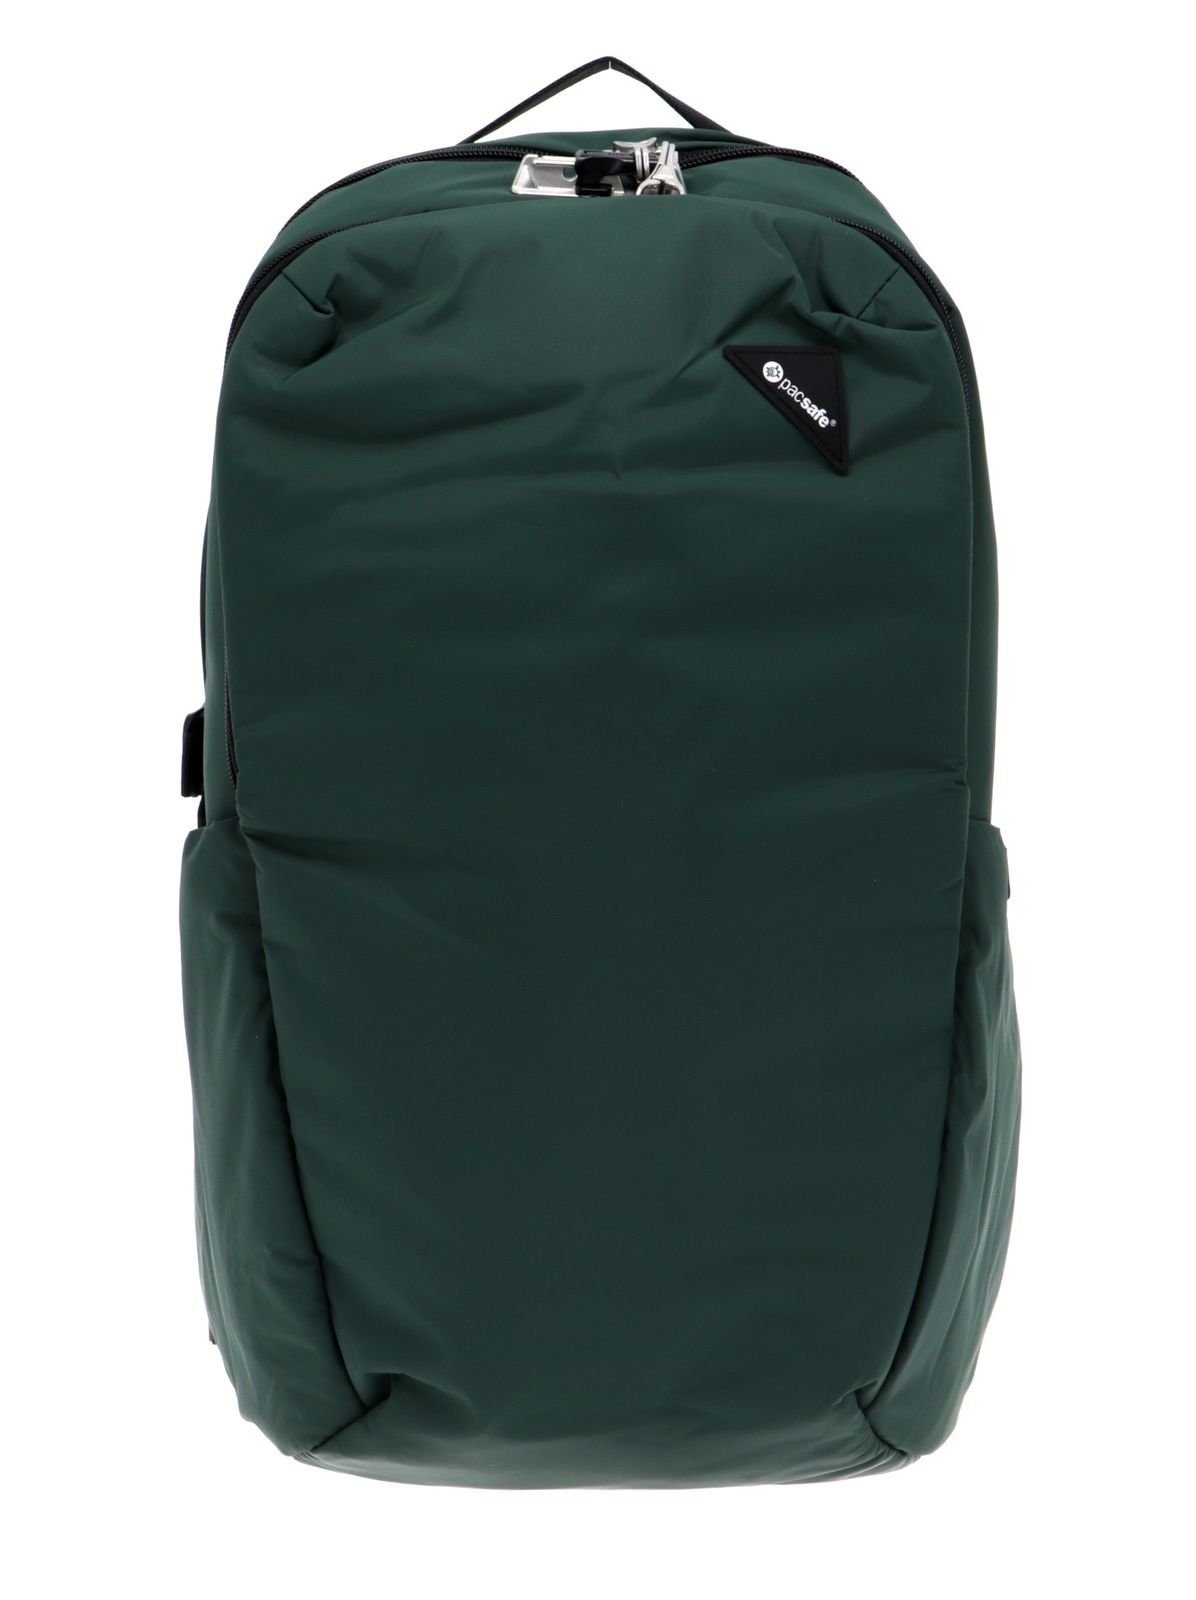 Pacsafe Rucksack Vibe Forest